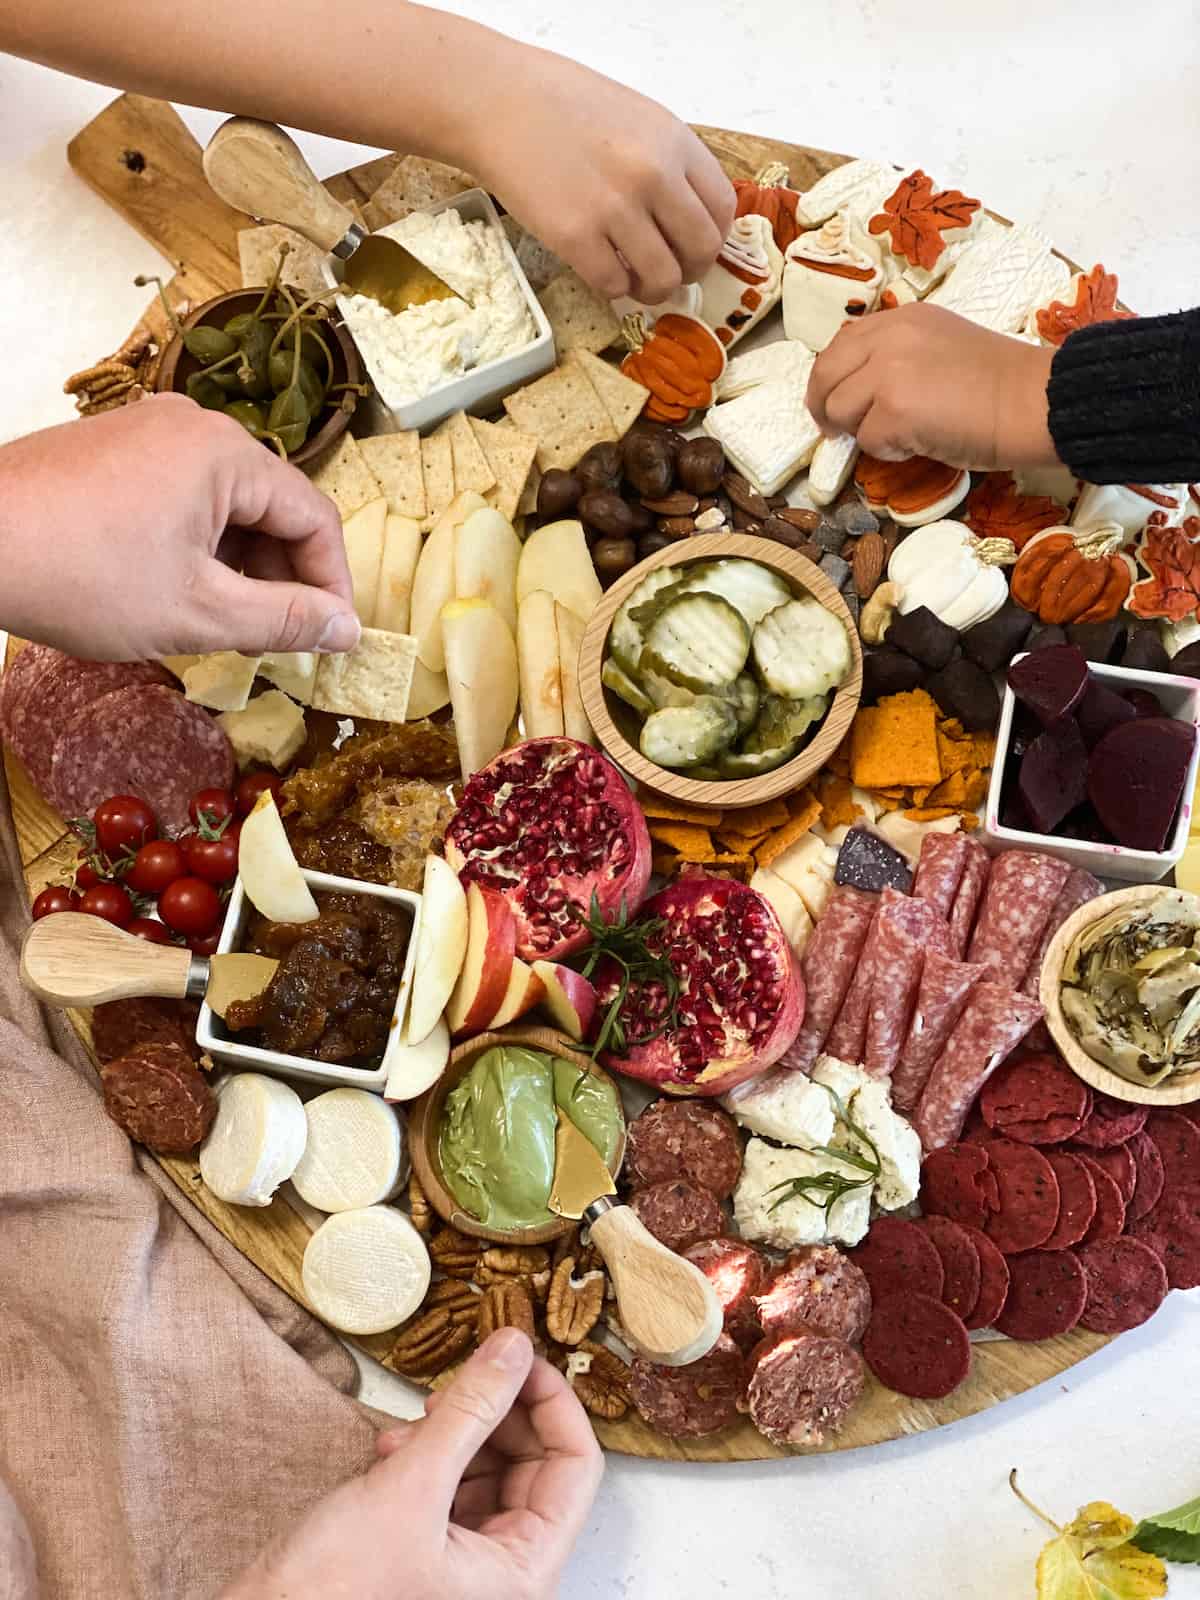 Hands eating Thanksgiving charcuterie board